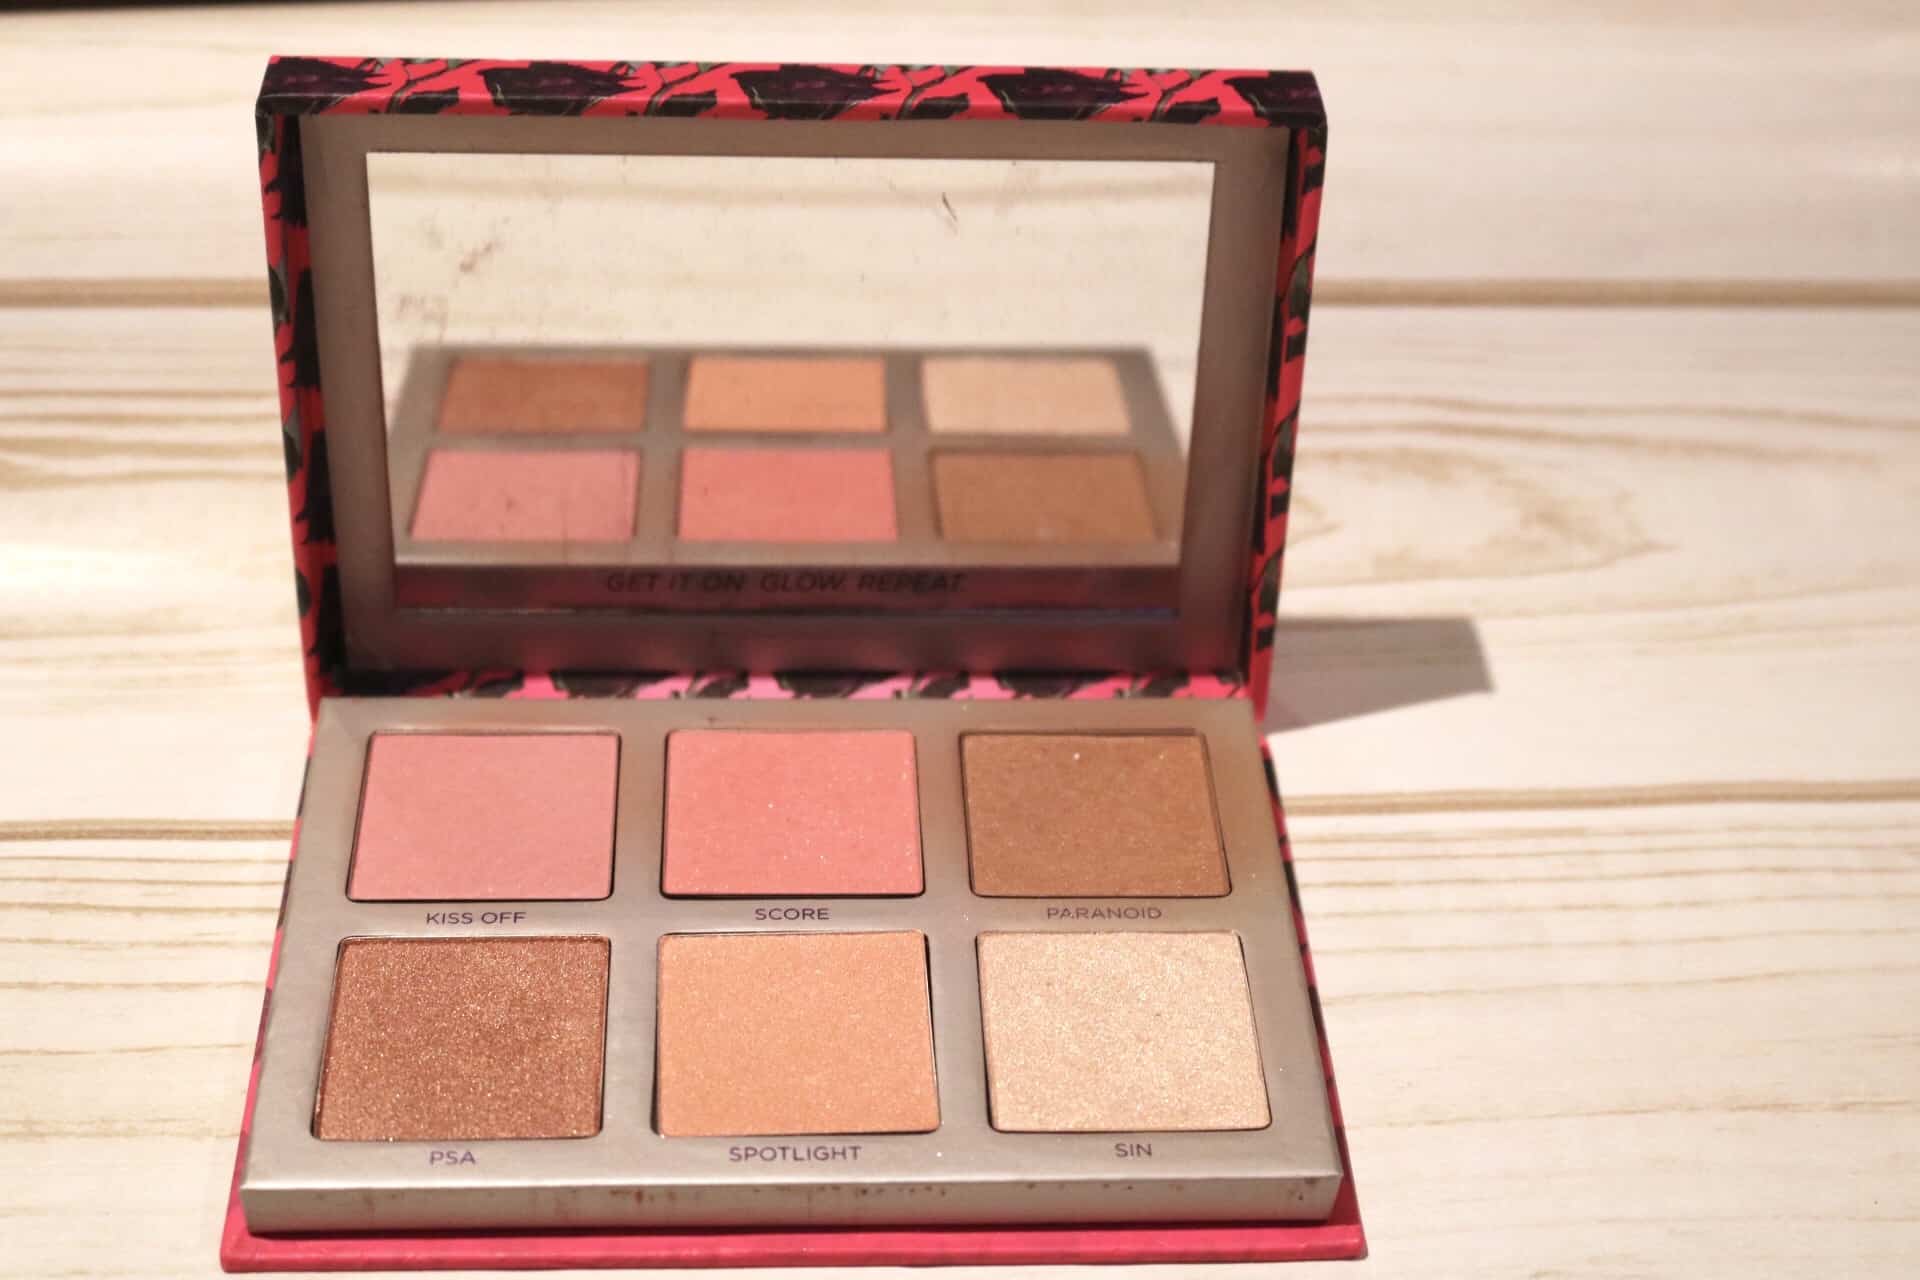 Eyeshadow and makeup palettes you will love